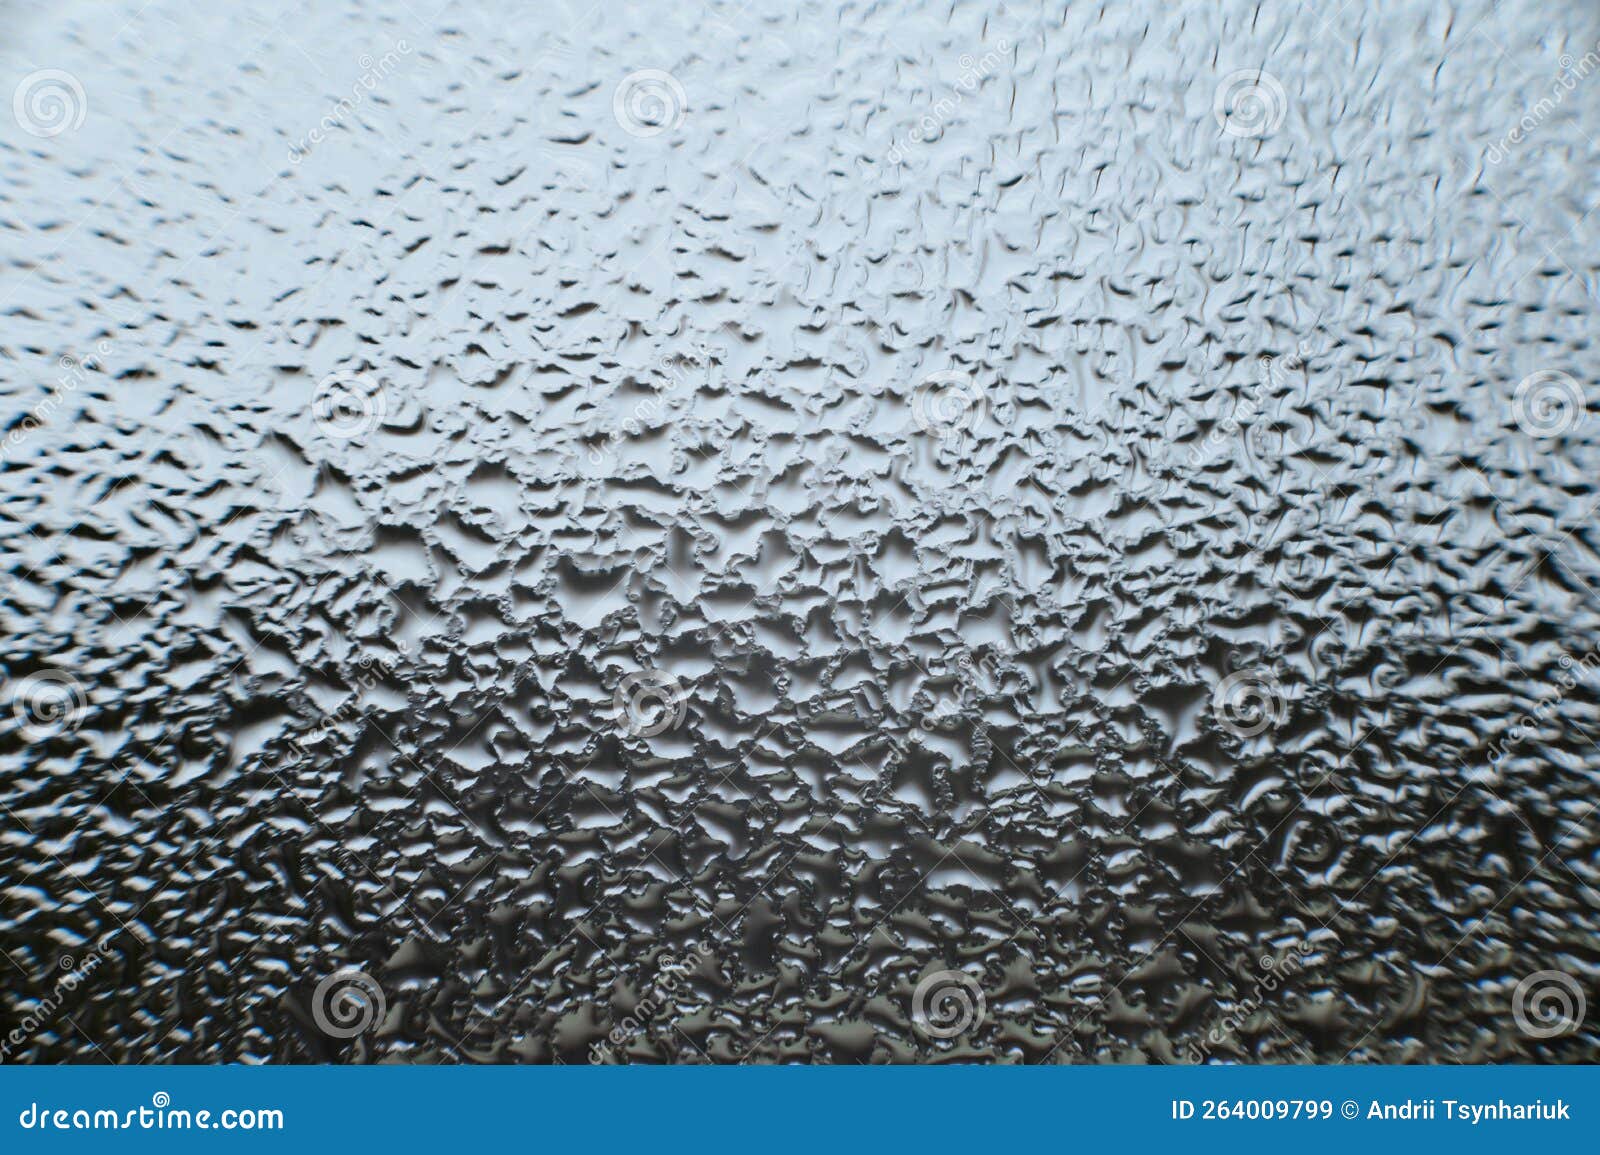 Large Dew Drops on the Window after Condensation Has Settled on the ...